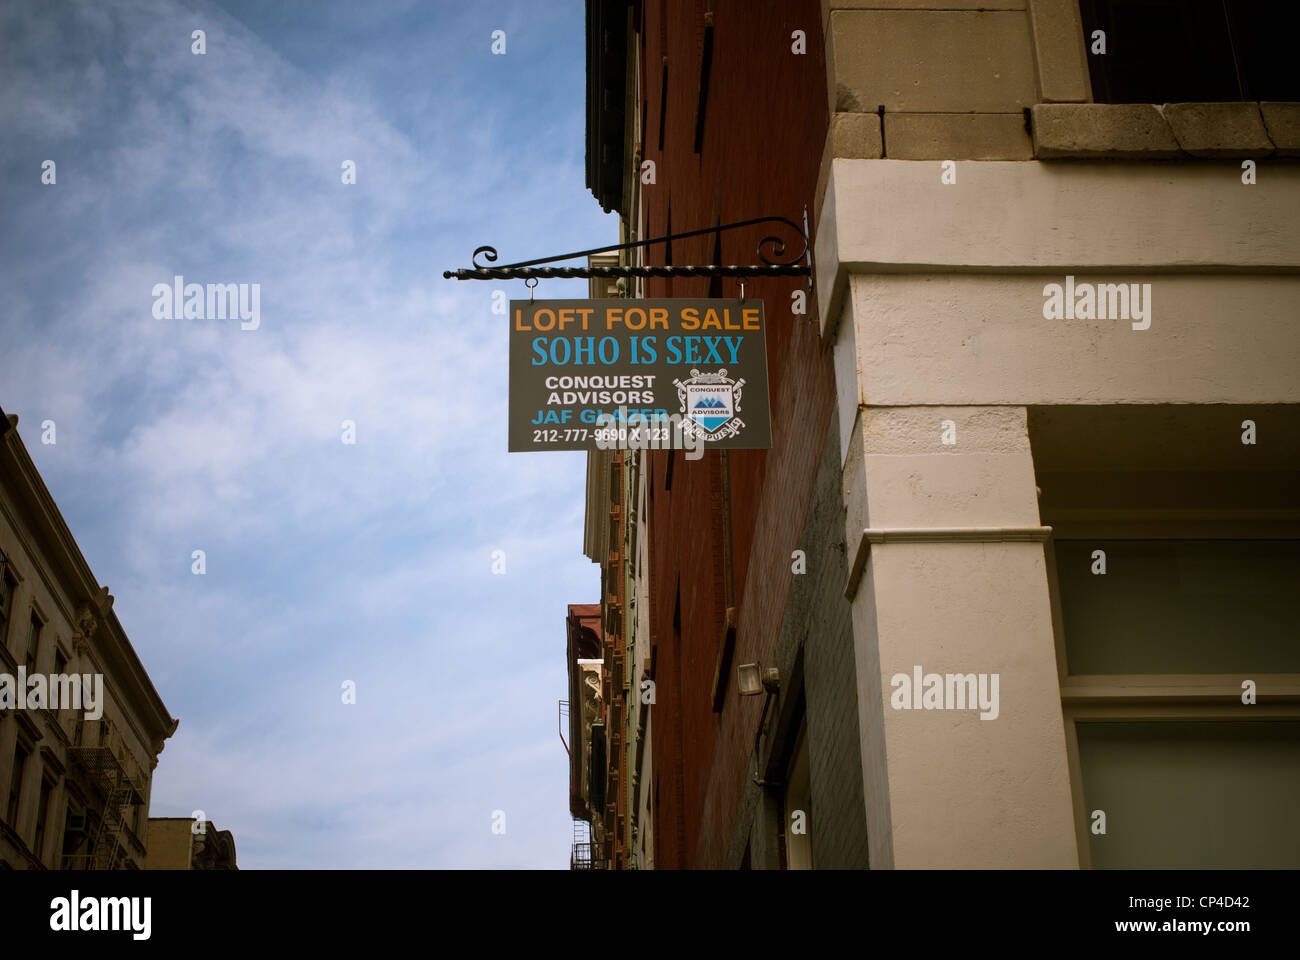 Sign advertising a loft for sale in the Soho neighborhood of New York on Saturday, April 28, 2012. (© Richard B. Levine) Stock Photo